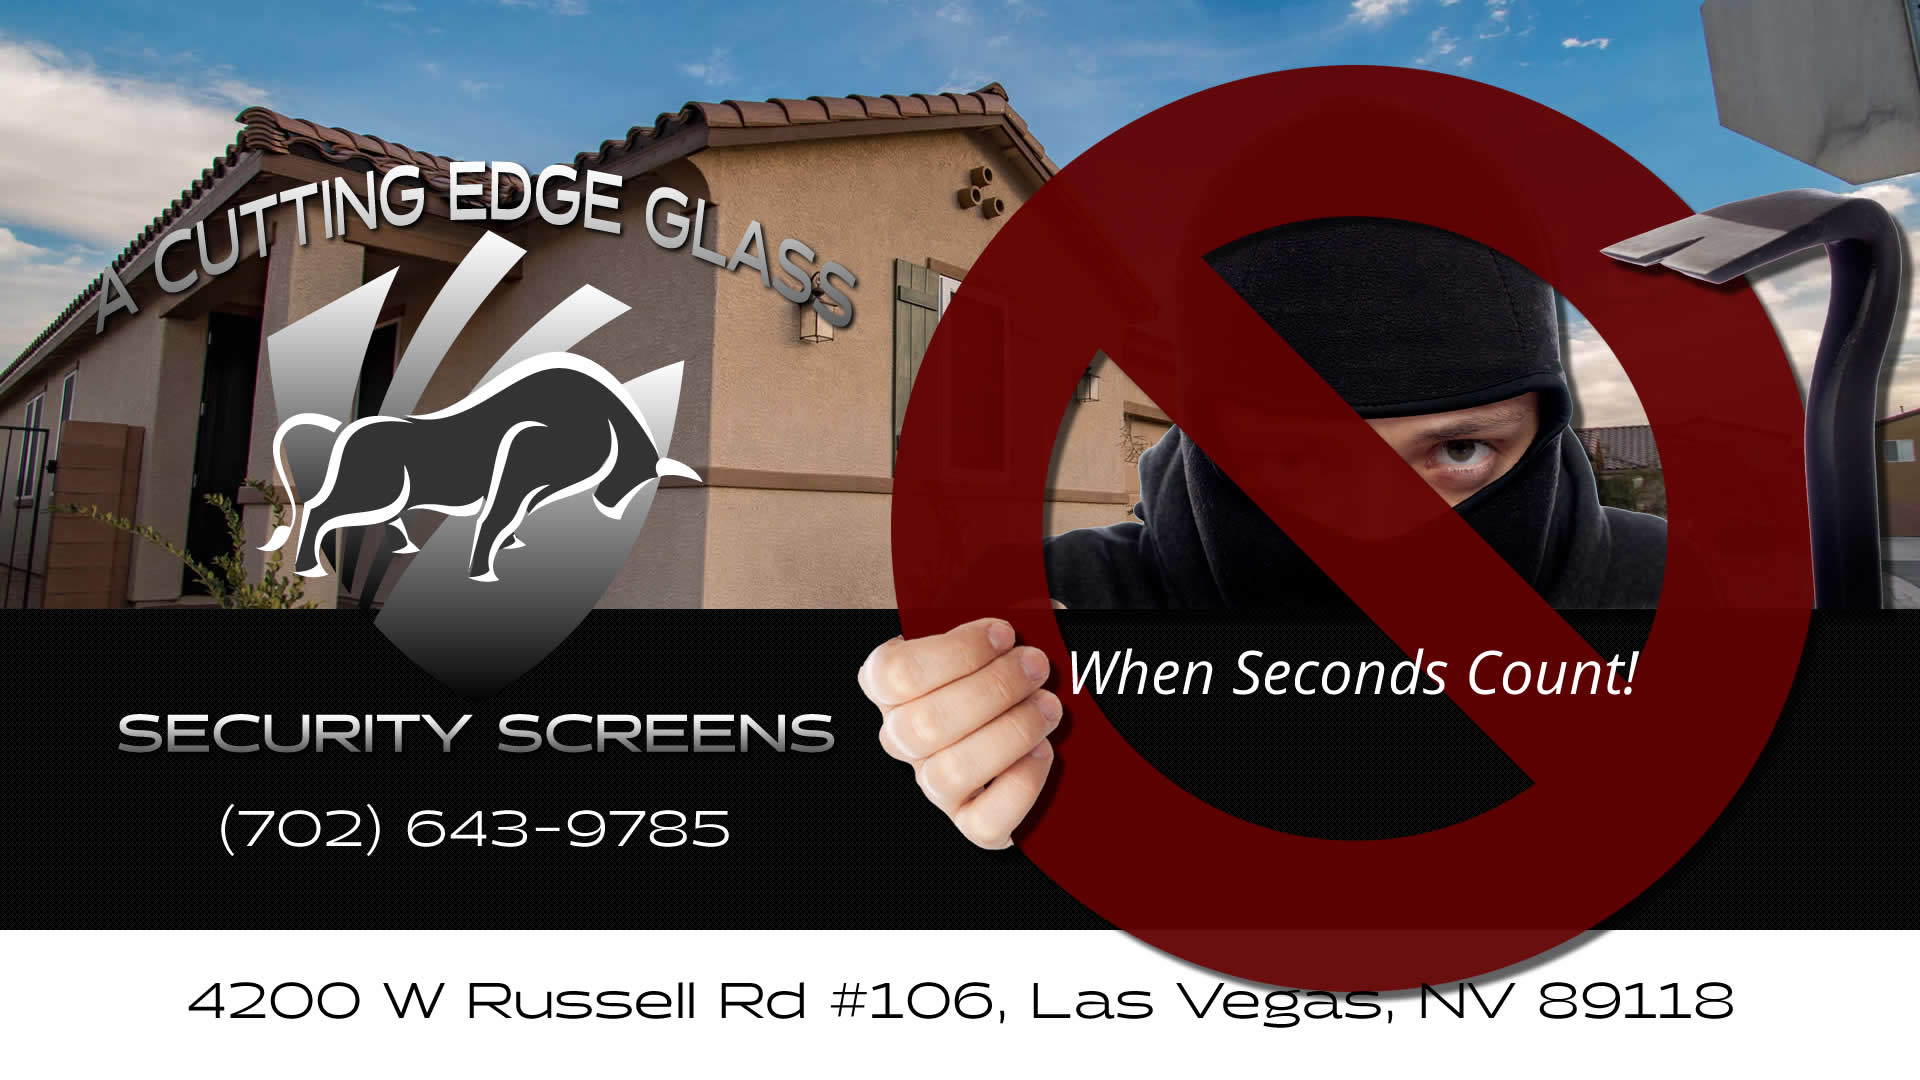 A Cutting Edge Glass & Security Screens Promo - Your Home Security Specialists